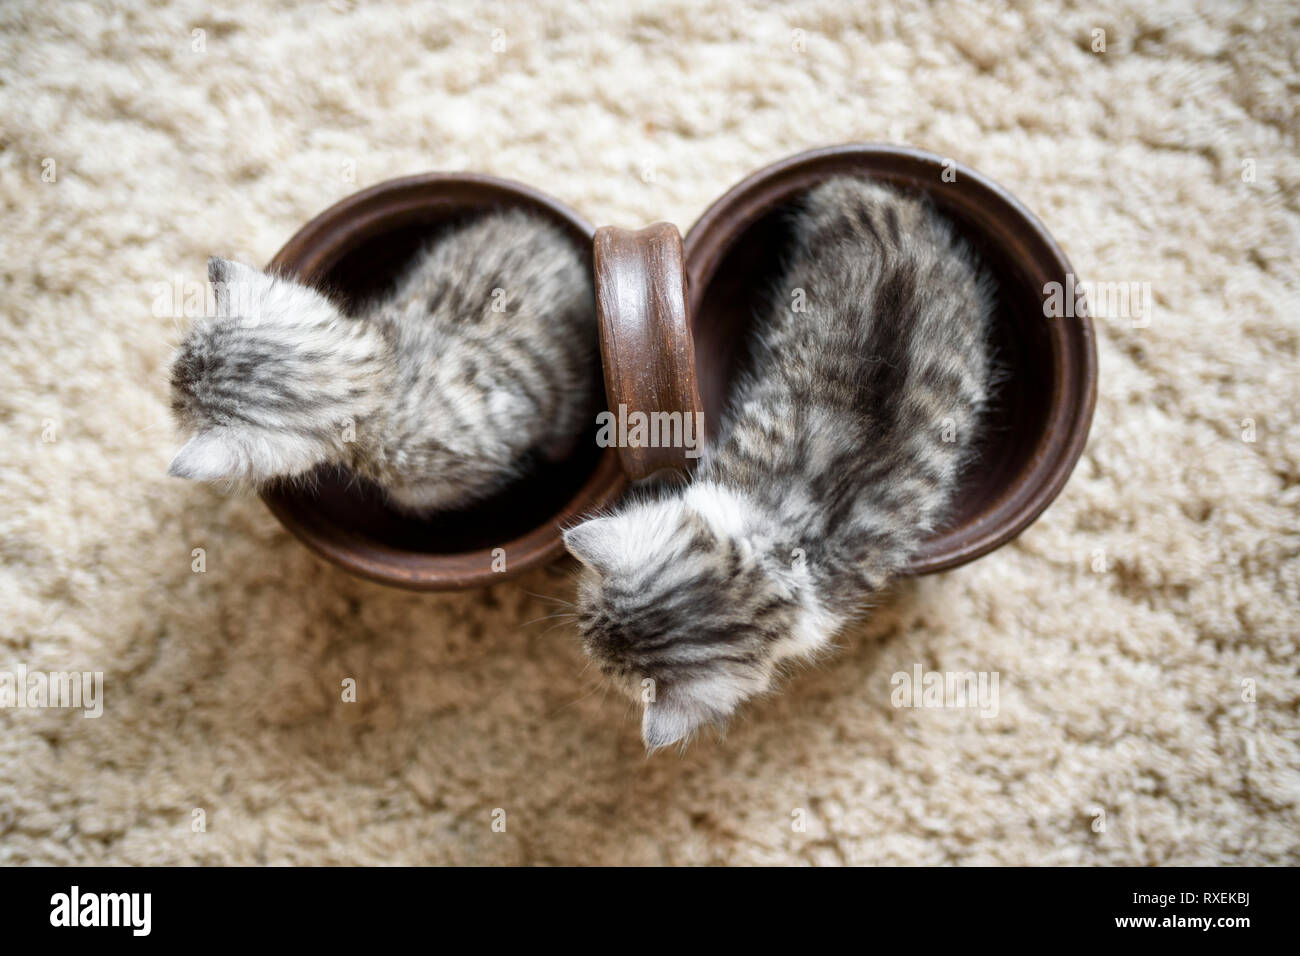 Top view on two white grey kittens in a brown pot with view on theirs head and cute little ears. Stock Photo